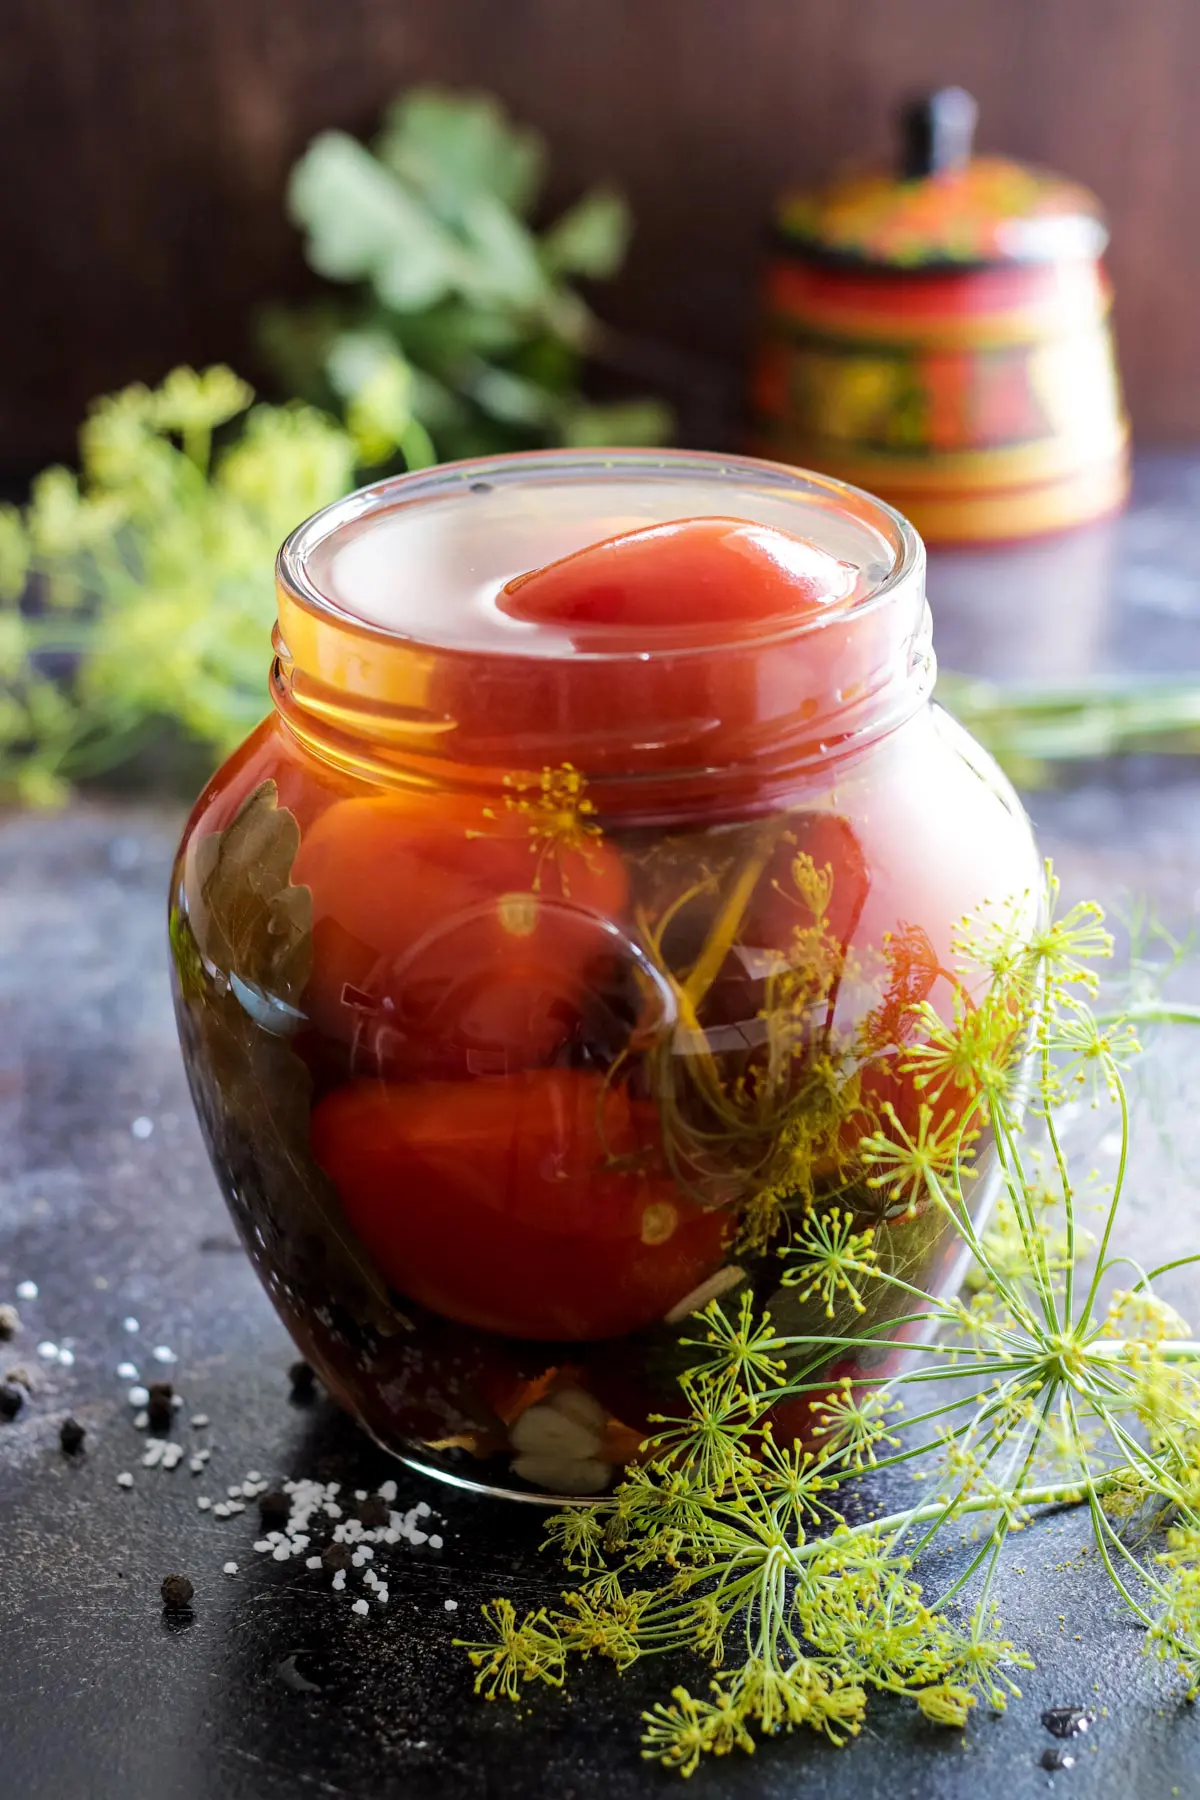 Opened jar with pickled tomatoes.